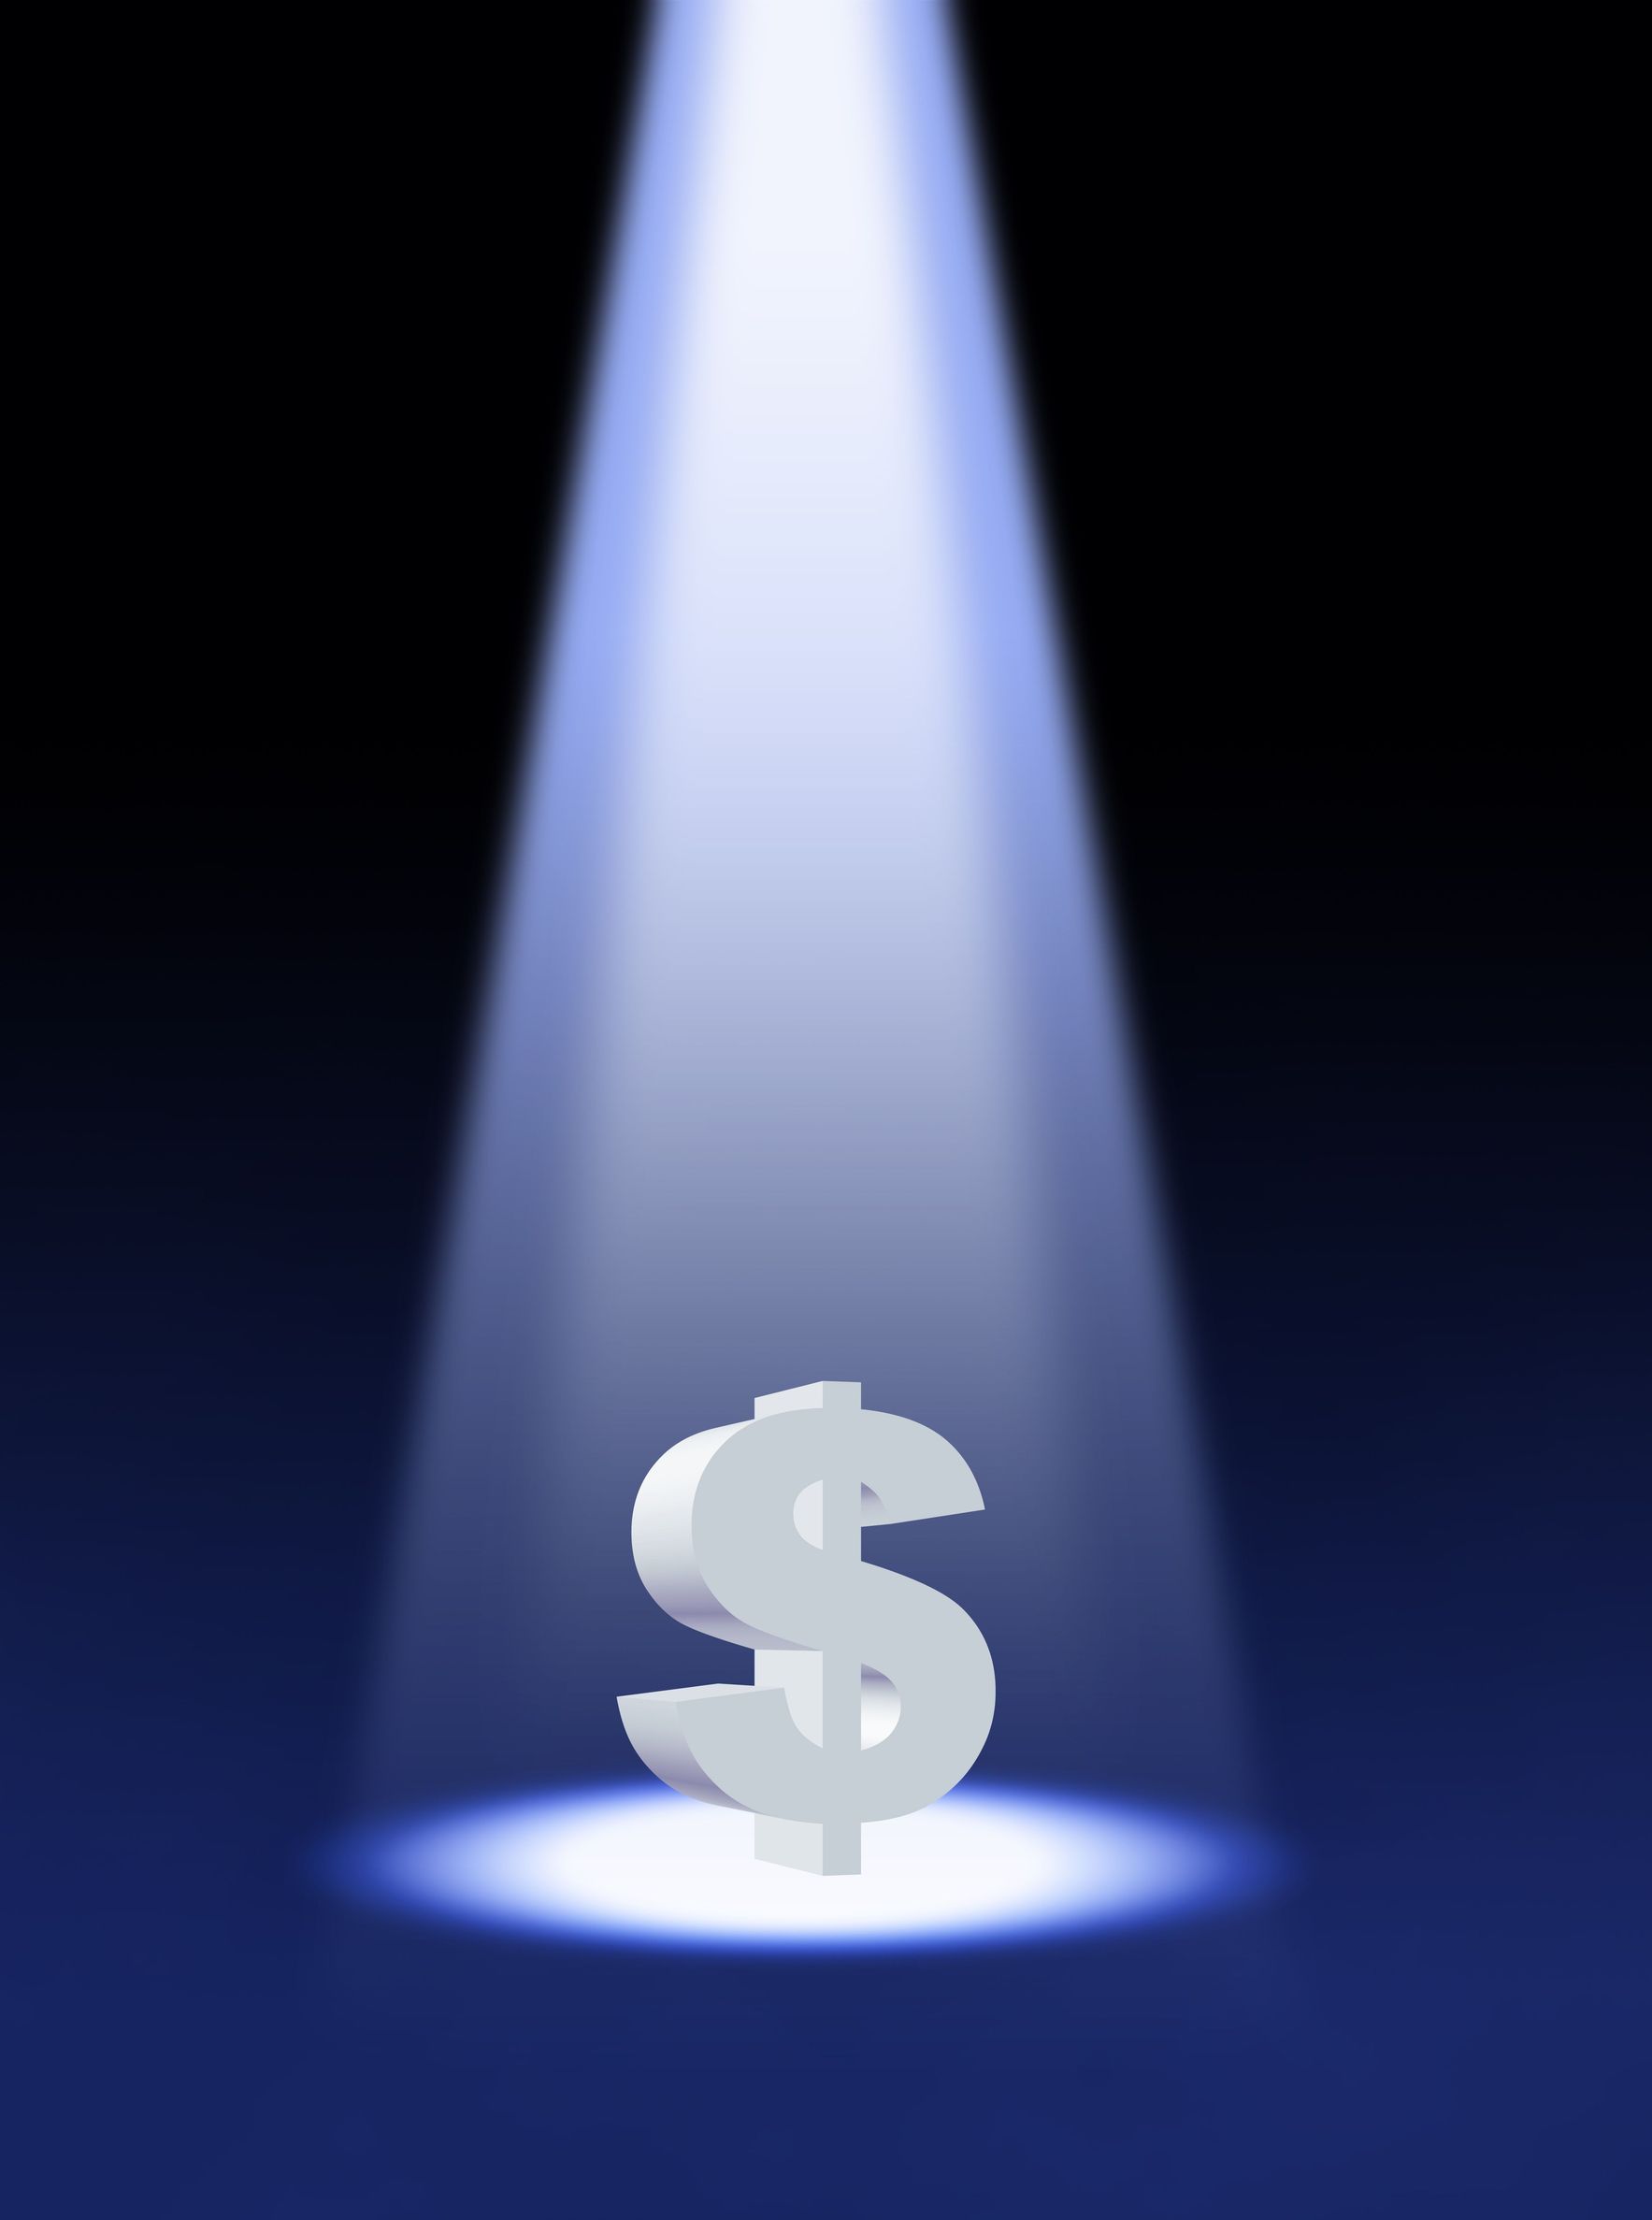 A dollar sign in the spotlight, just like health insurance premium changes are highlighted each April